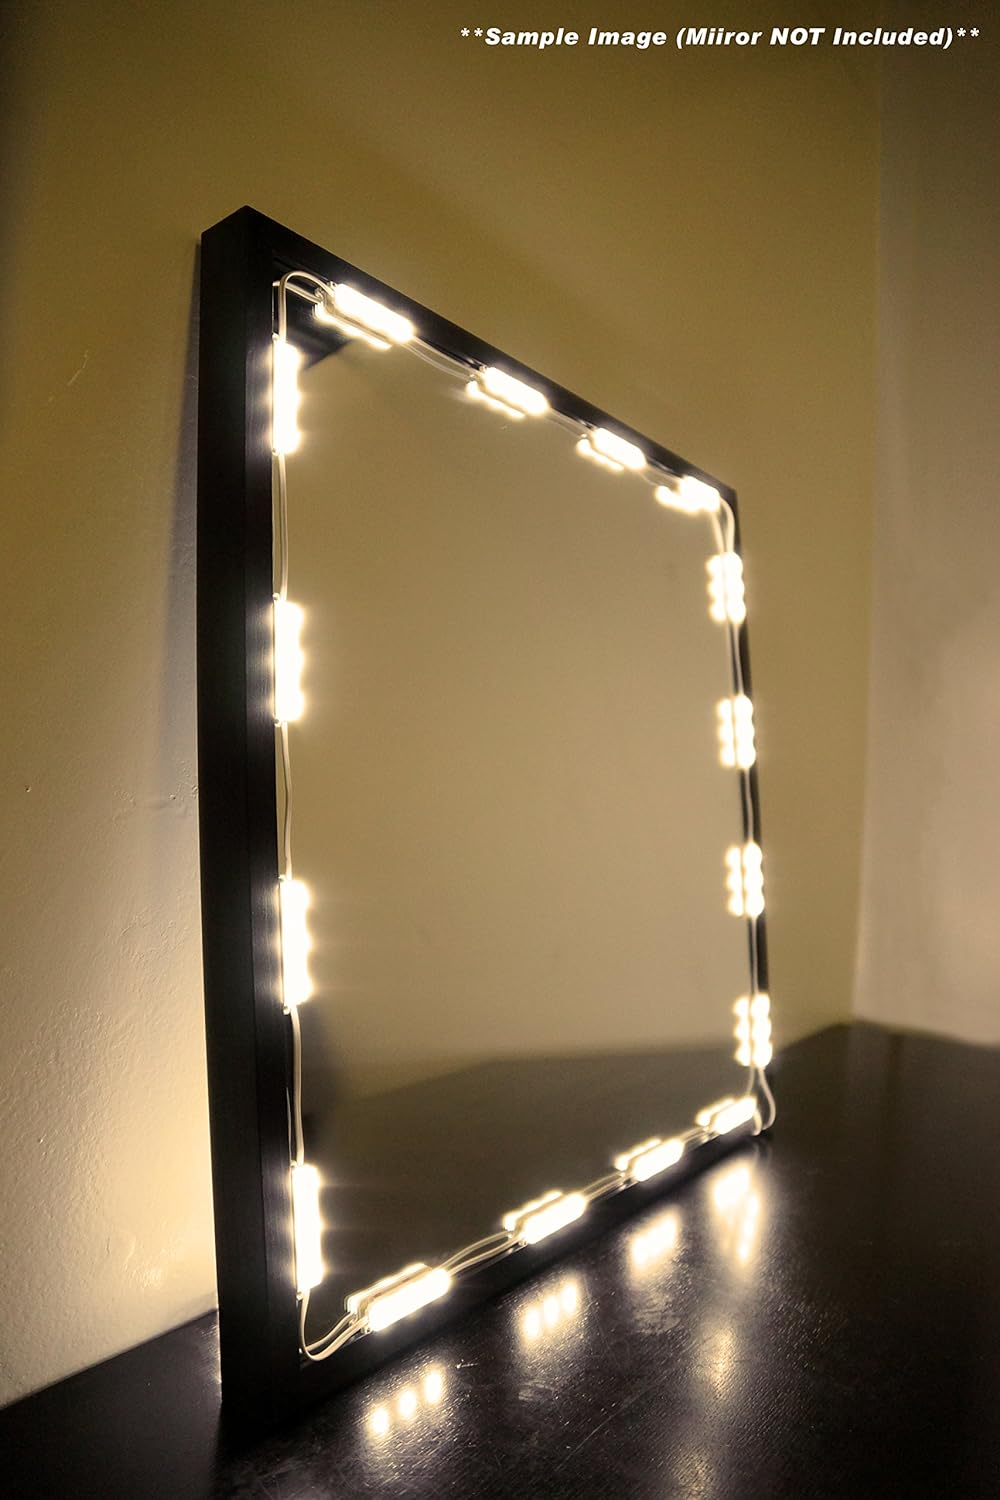 Crystal Vision Hollywood Style Makeup Mirror LED Light Kit Provided by Samsung for Cosmetic Mirror Vanity Mirror w/ Dimmer Controller (75 LED Bulb / 12.5ft) [Warm White]